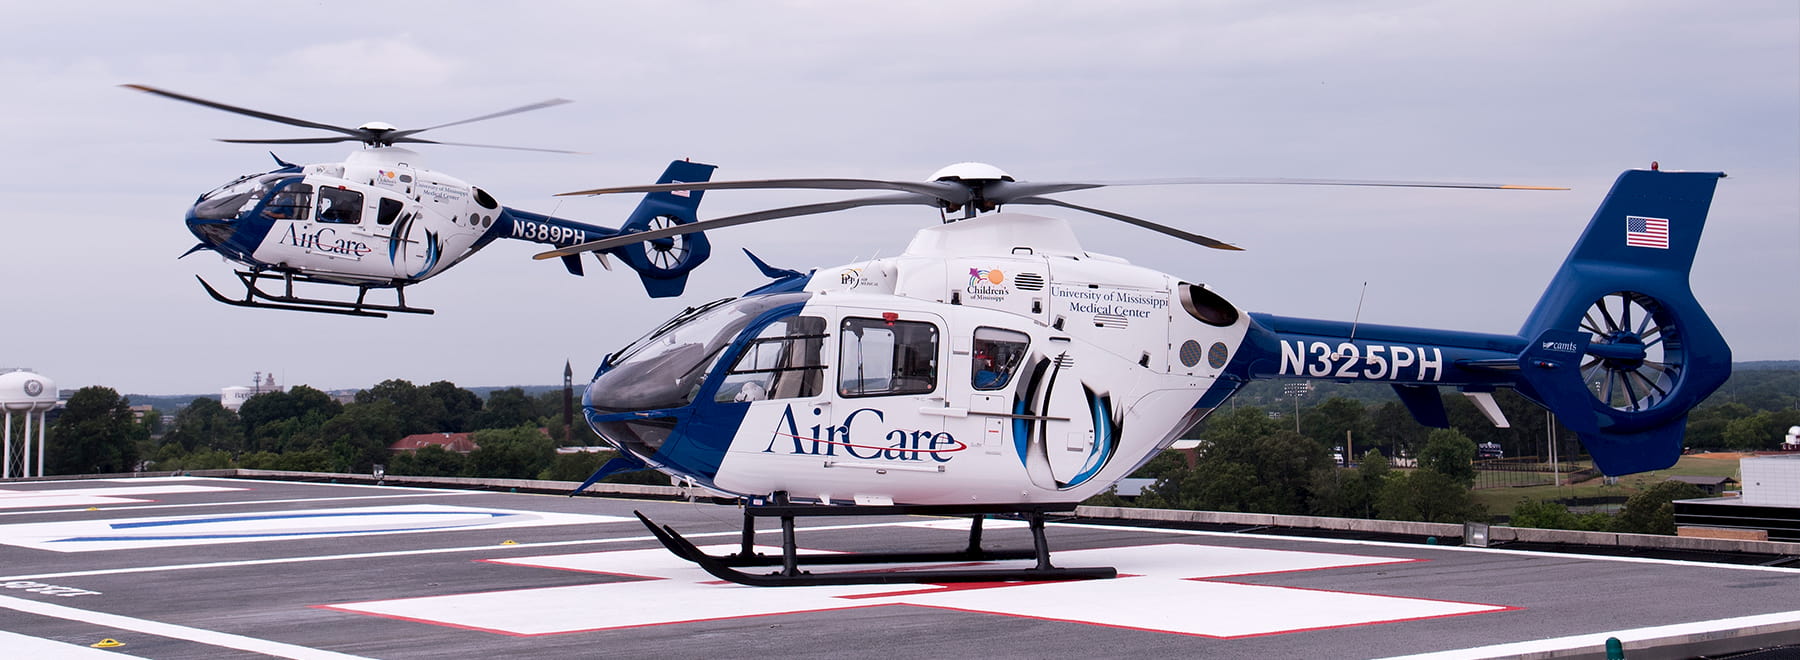 Two AirCare helicopters with one in flight